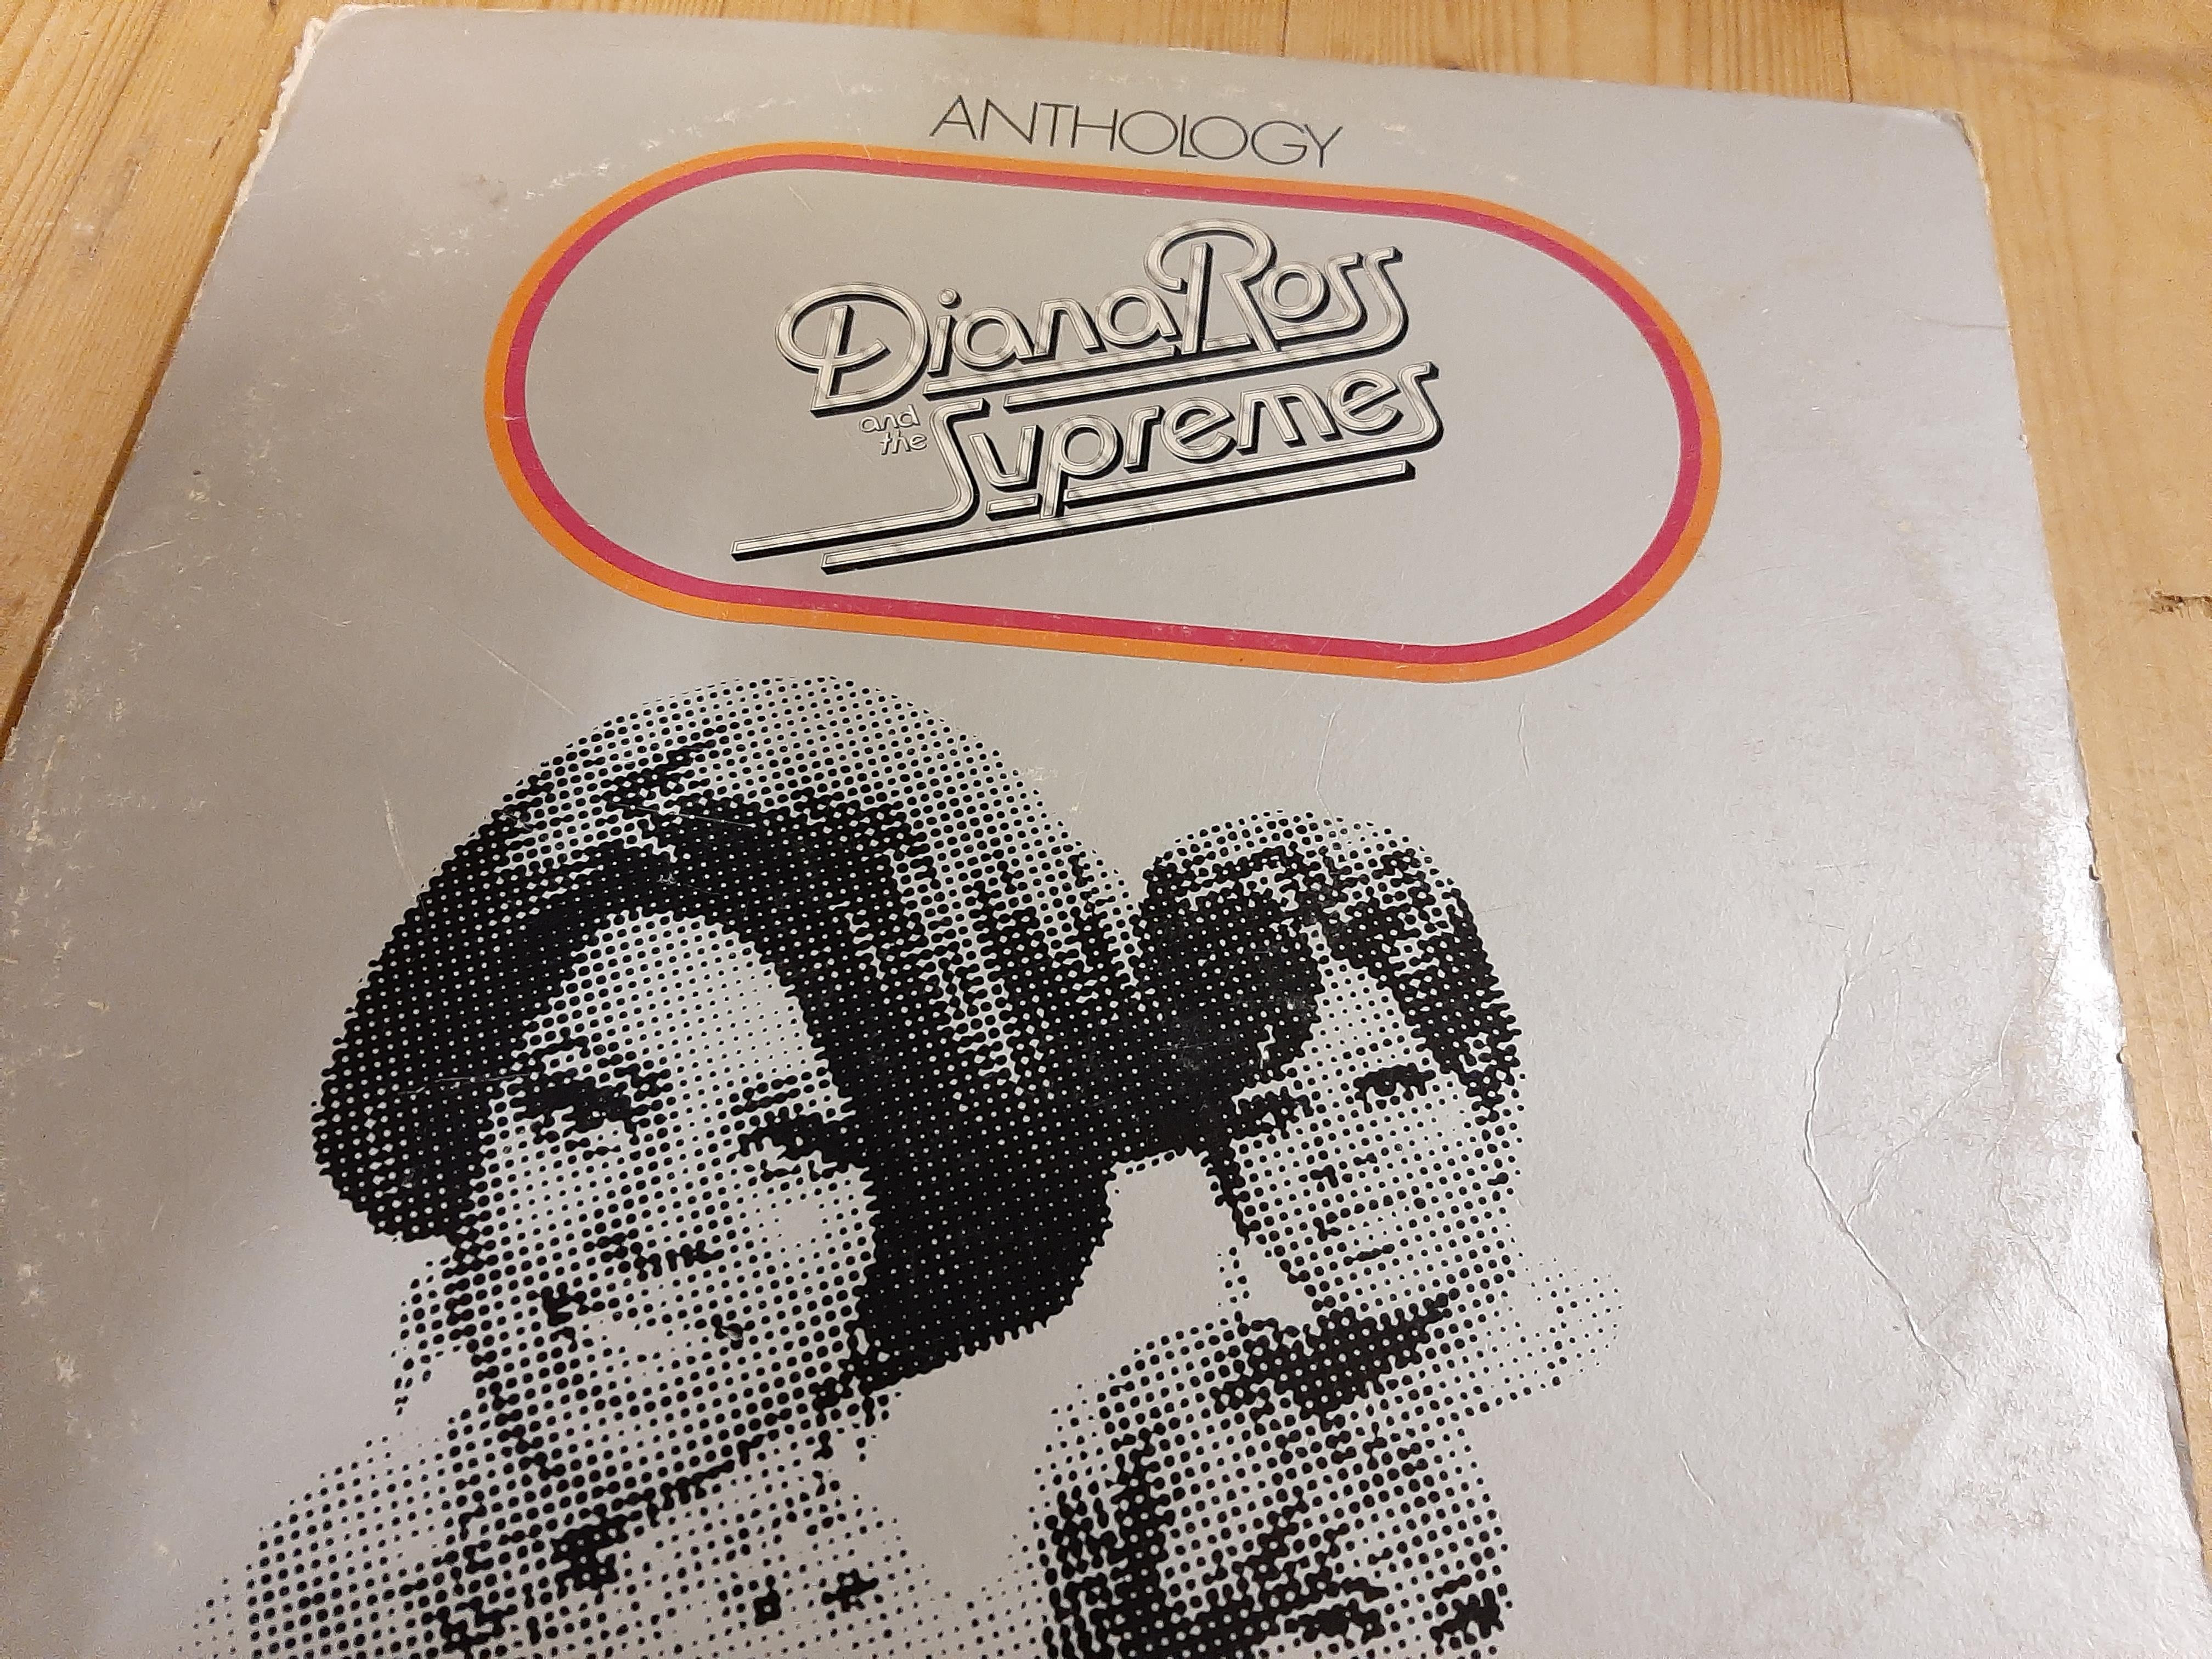 3 Vinyl Records: "Meet the Supremes" 1964 (rare); SL 10169; Diana Ross and the Supremes "Greatest - Image 6 of 6